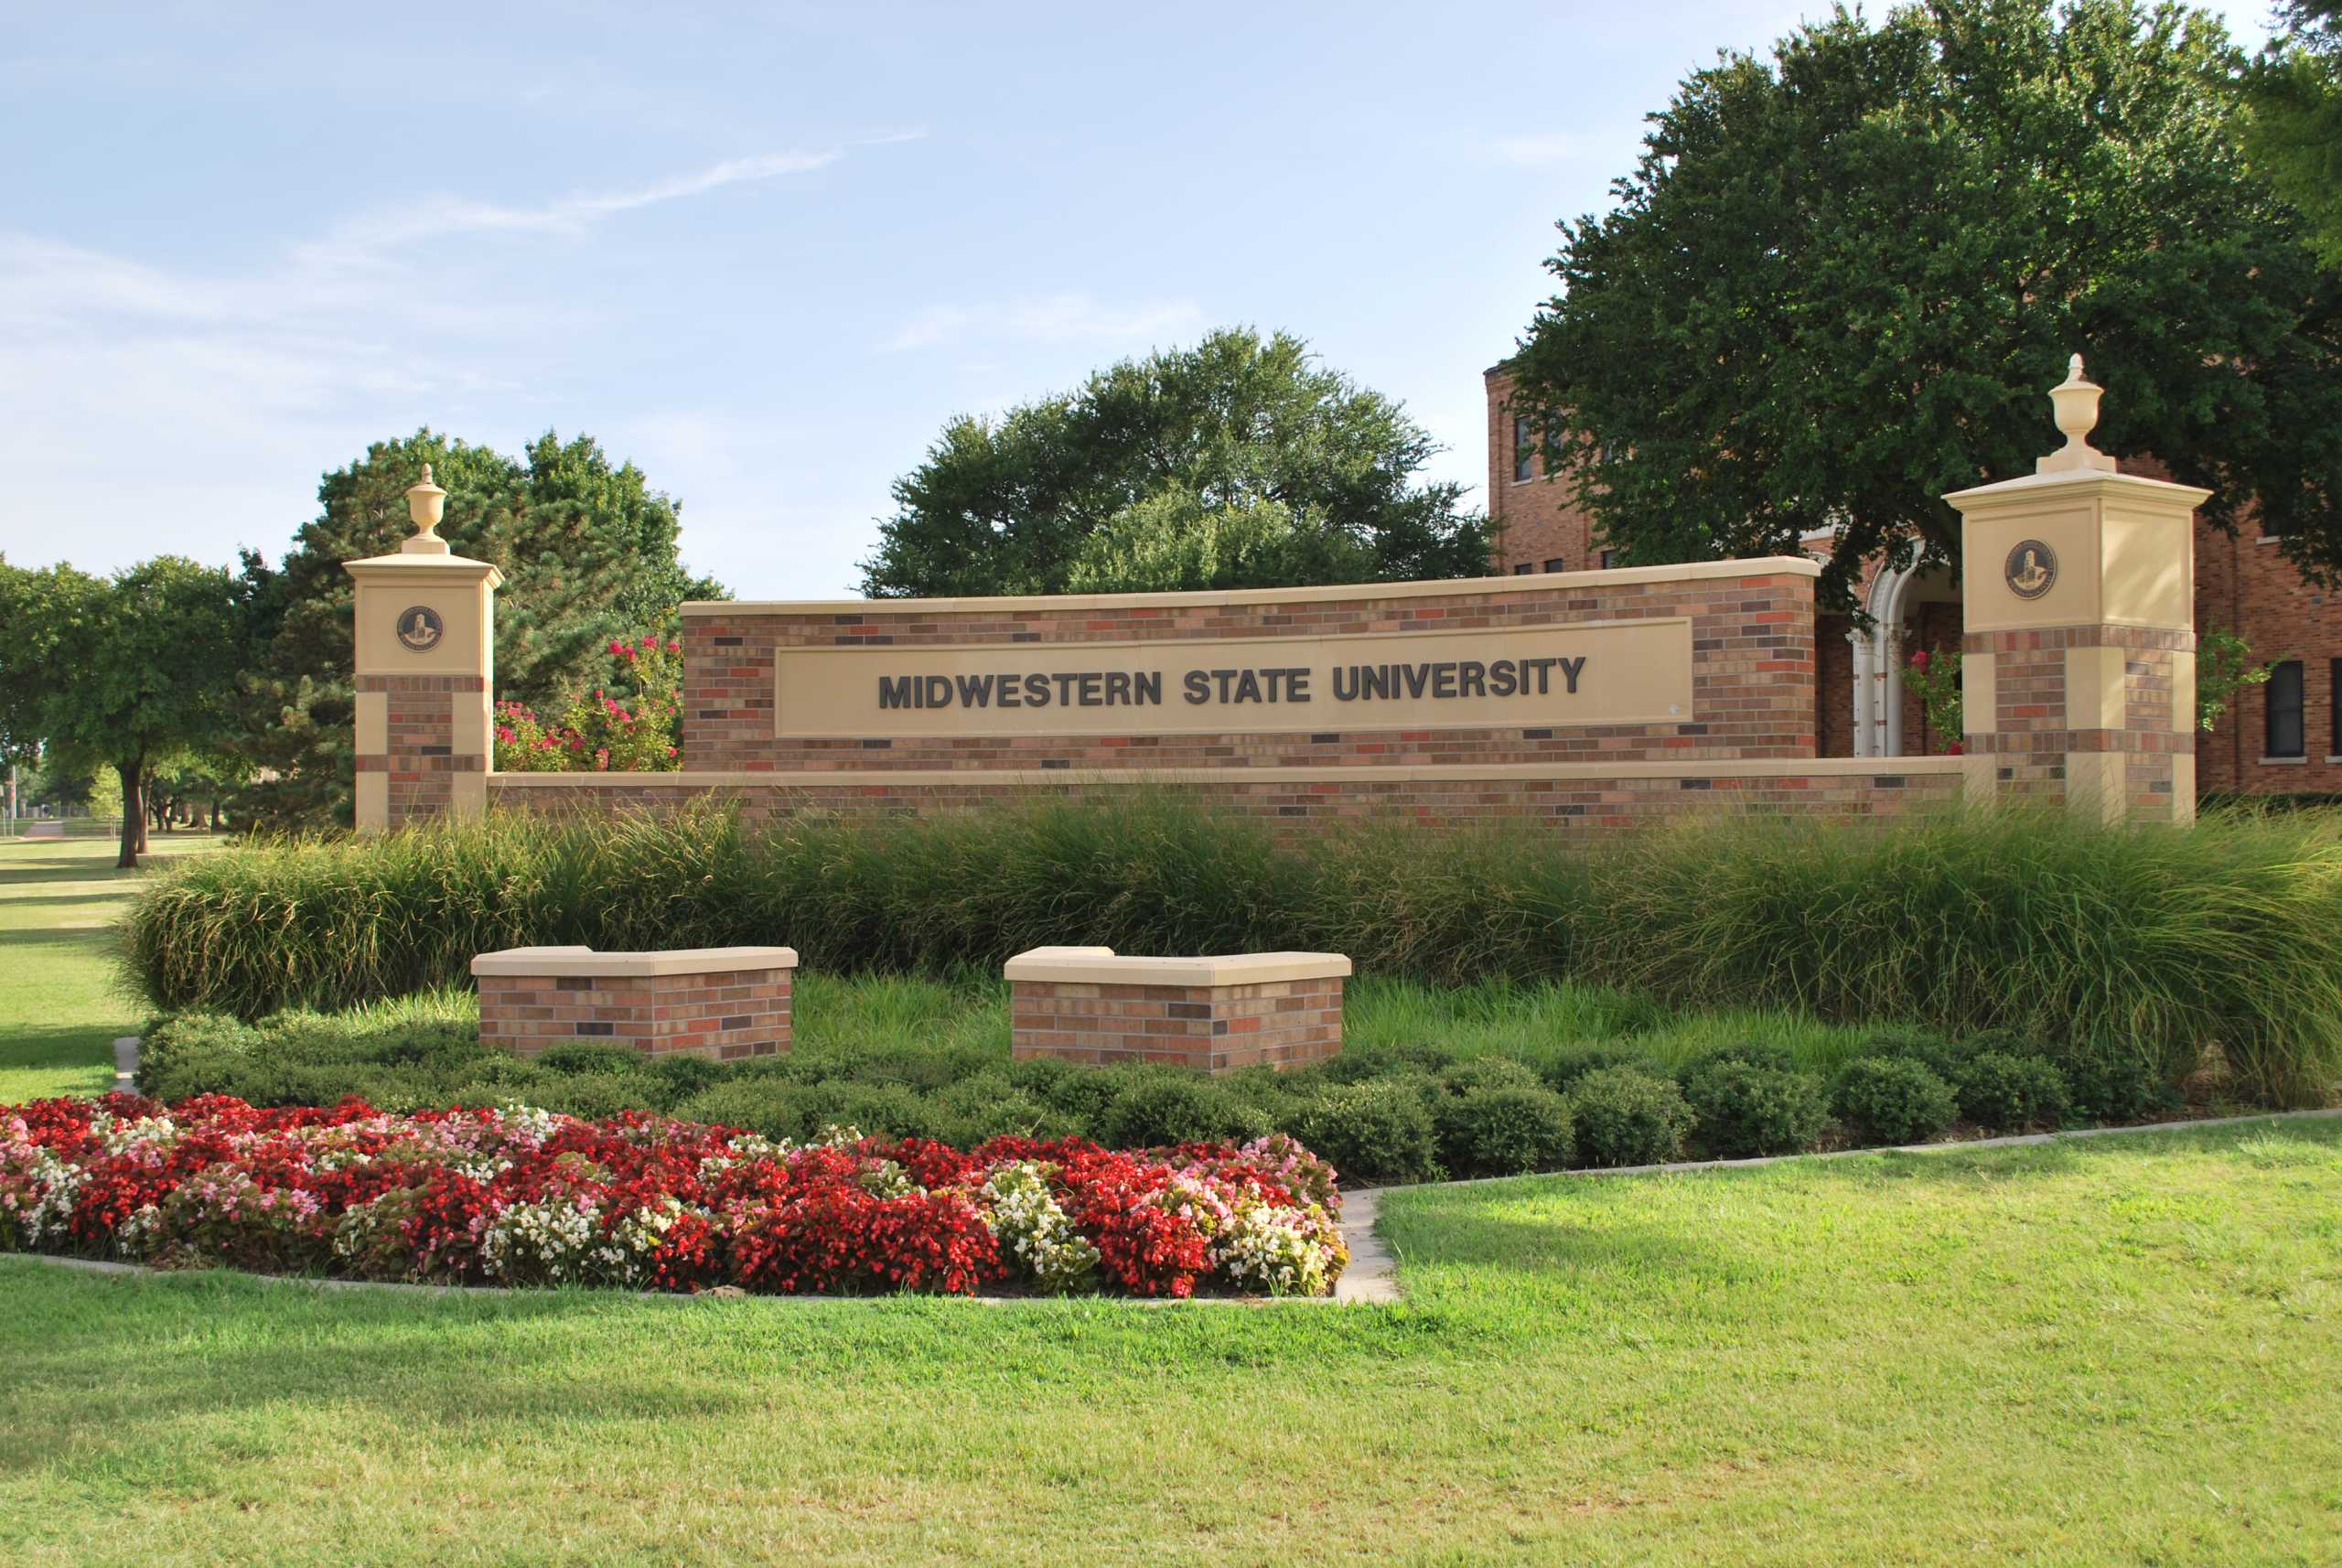 Midwestern State University - Go Mustangs!